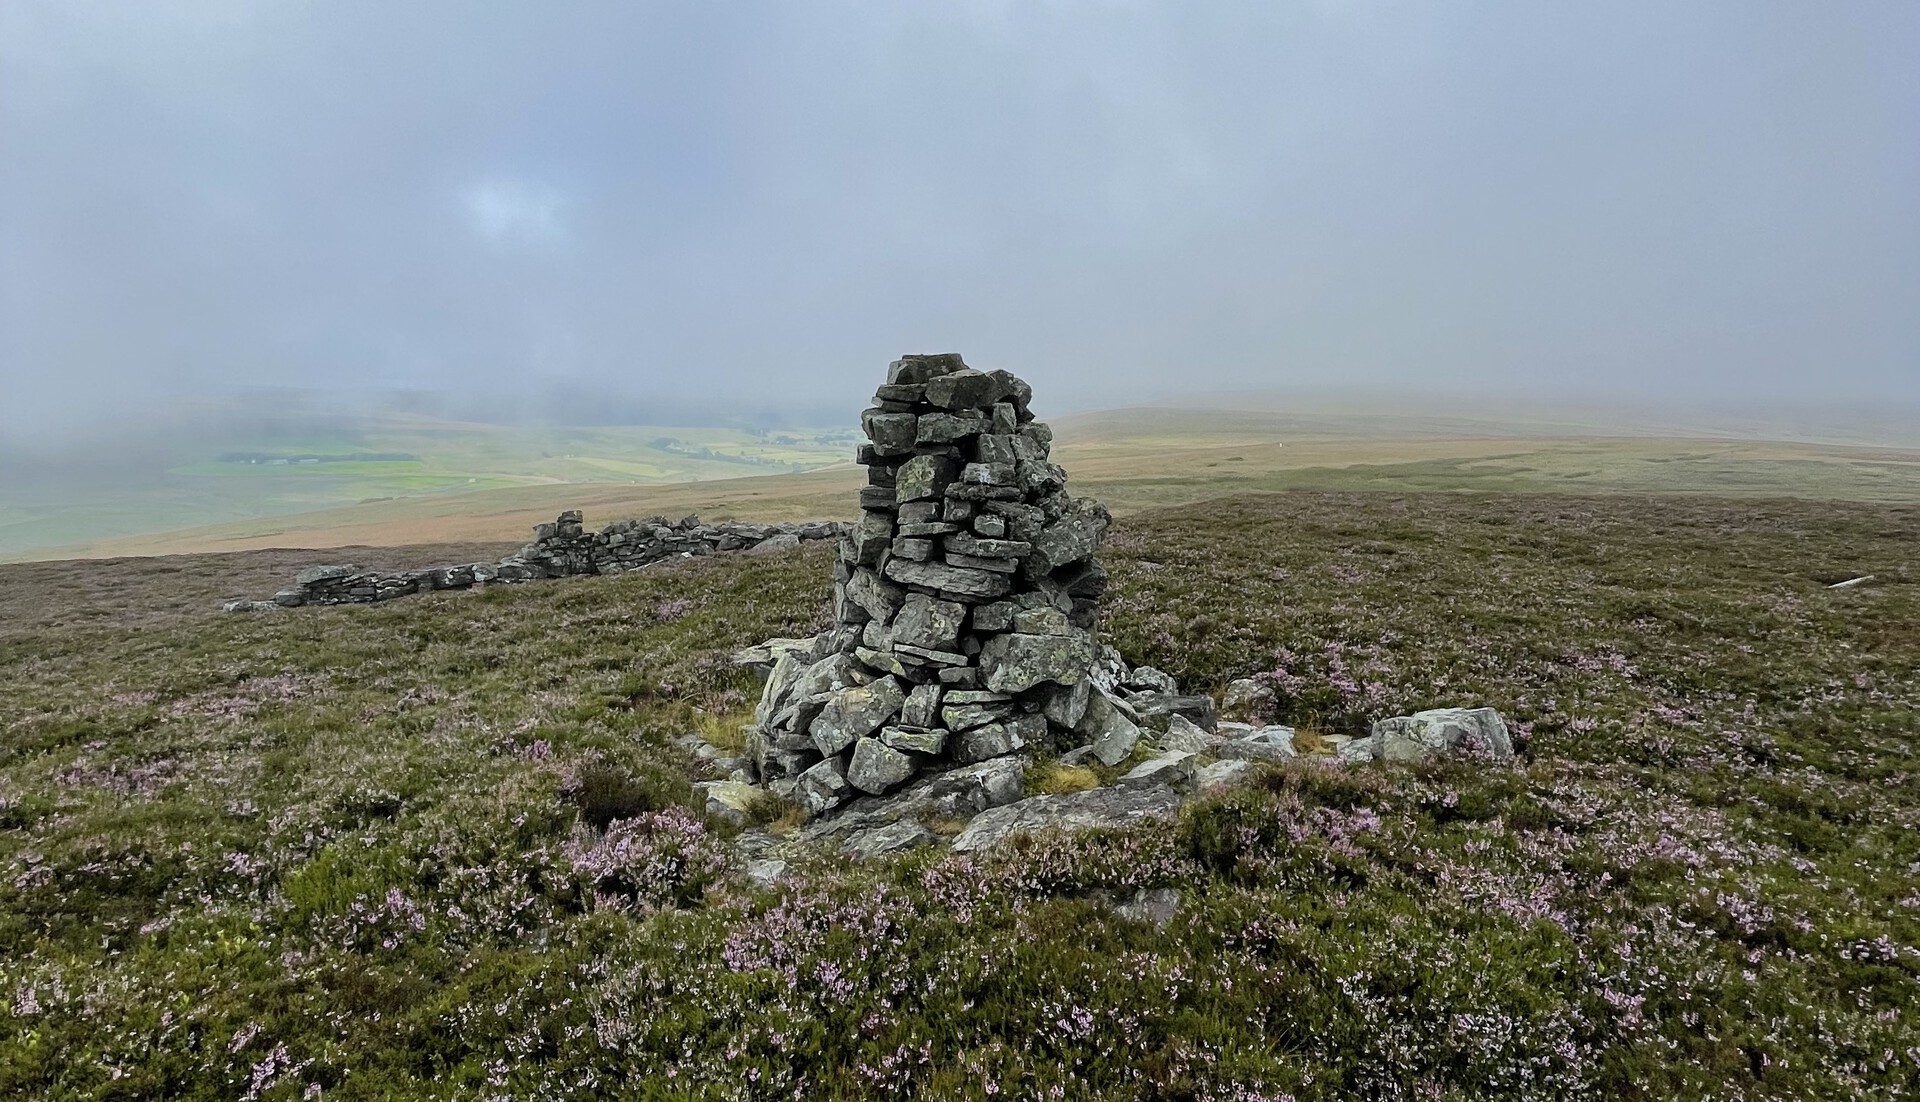 A cairn up on the moor—or a "currick", as they call em in the Pennines